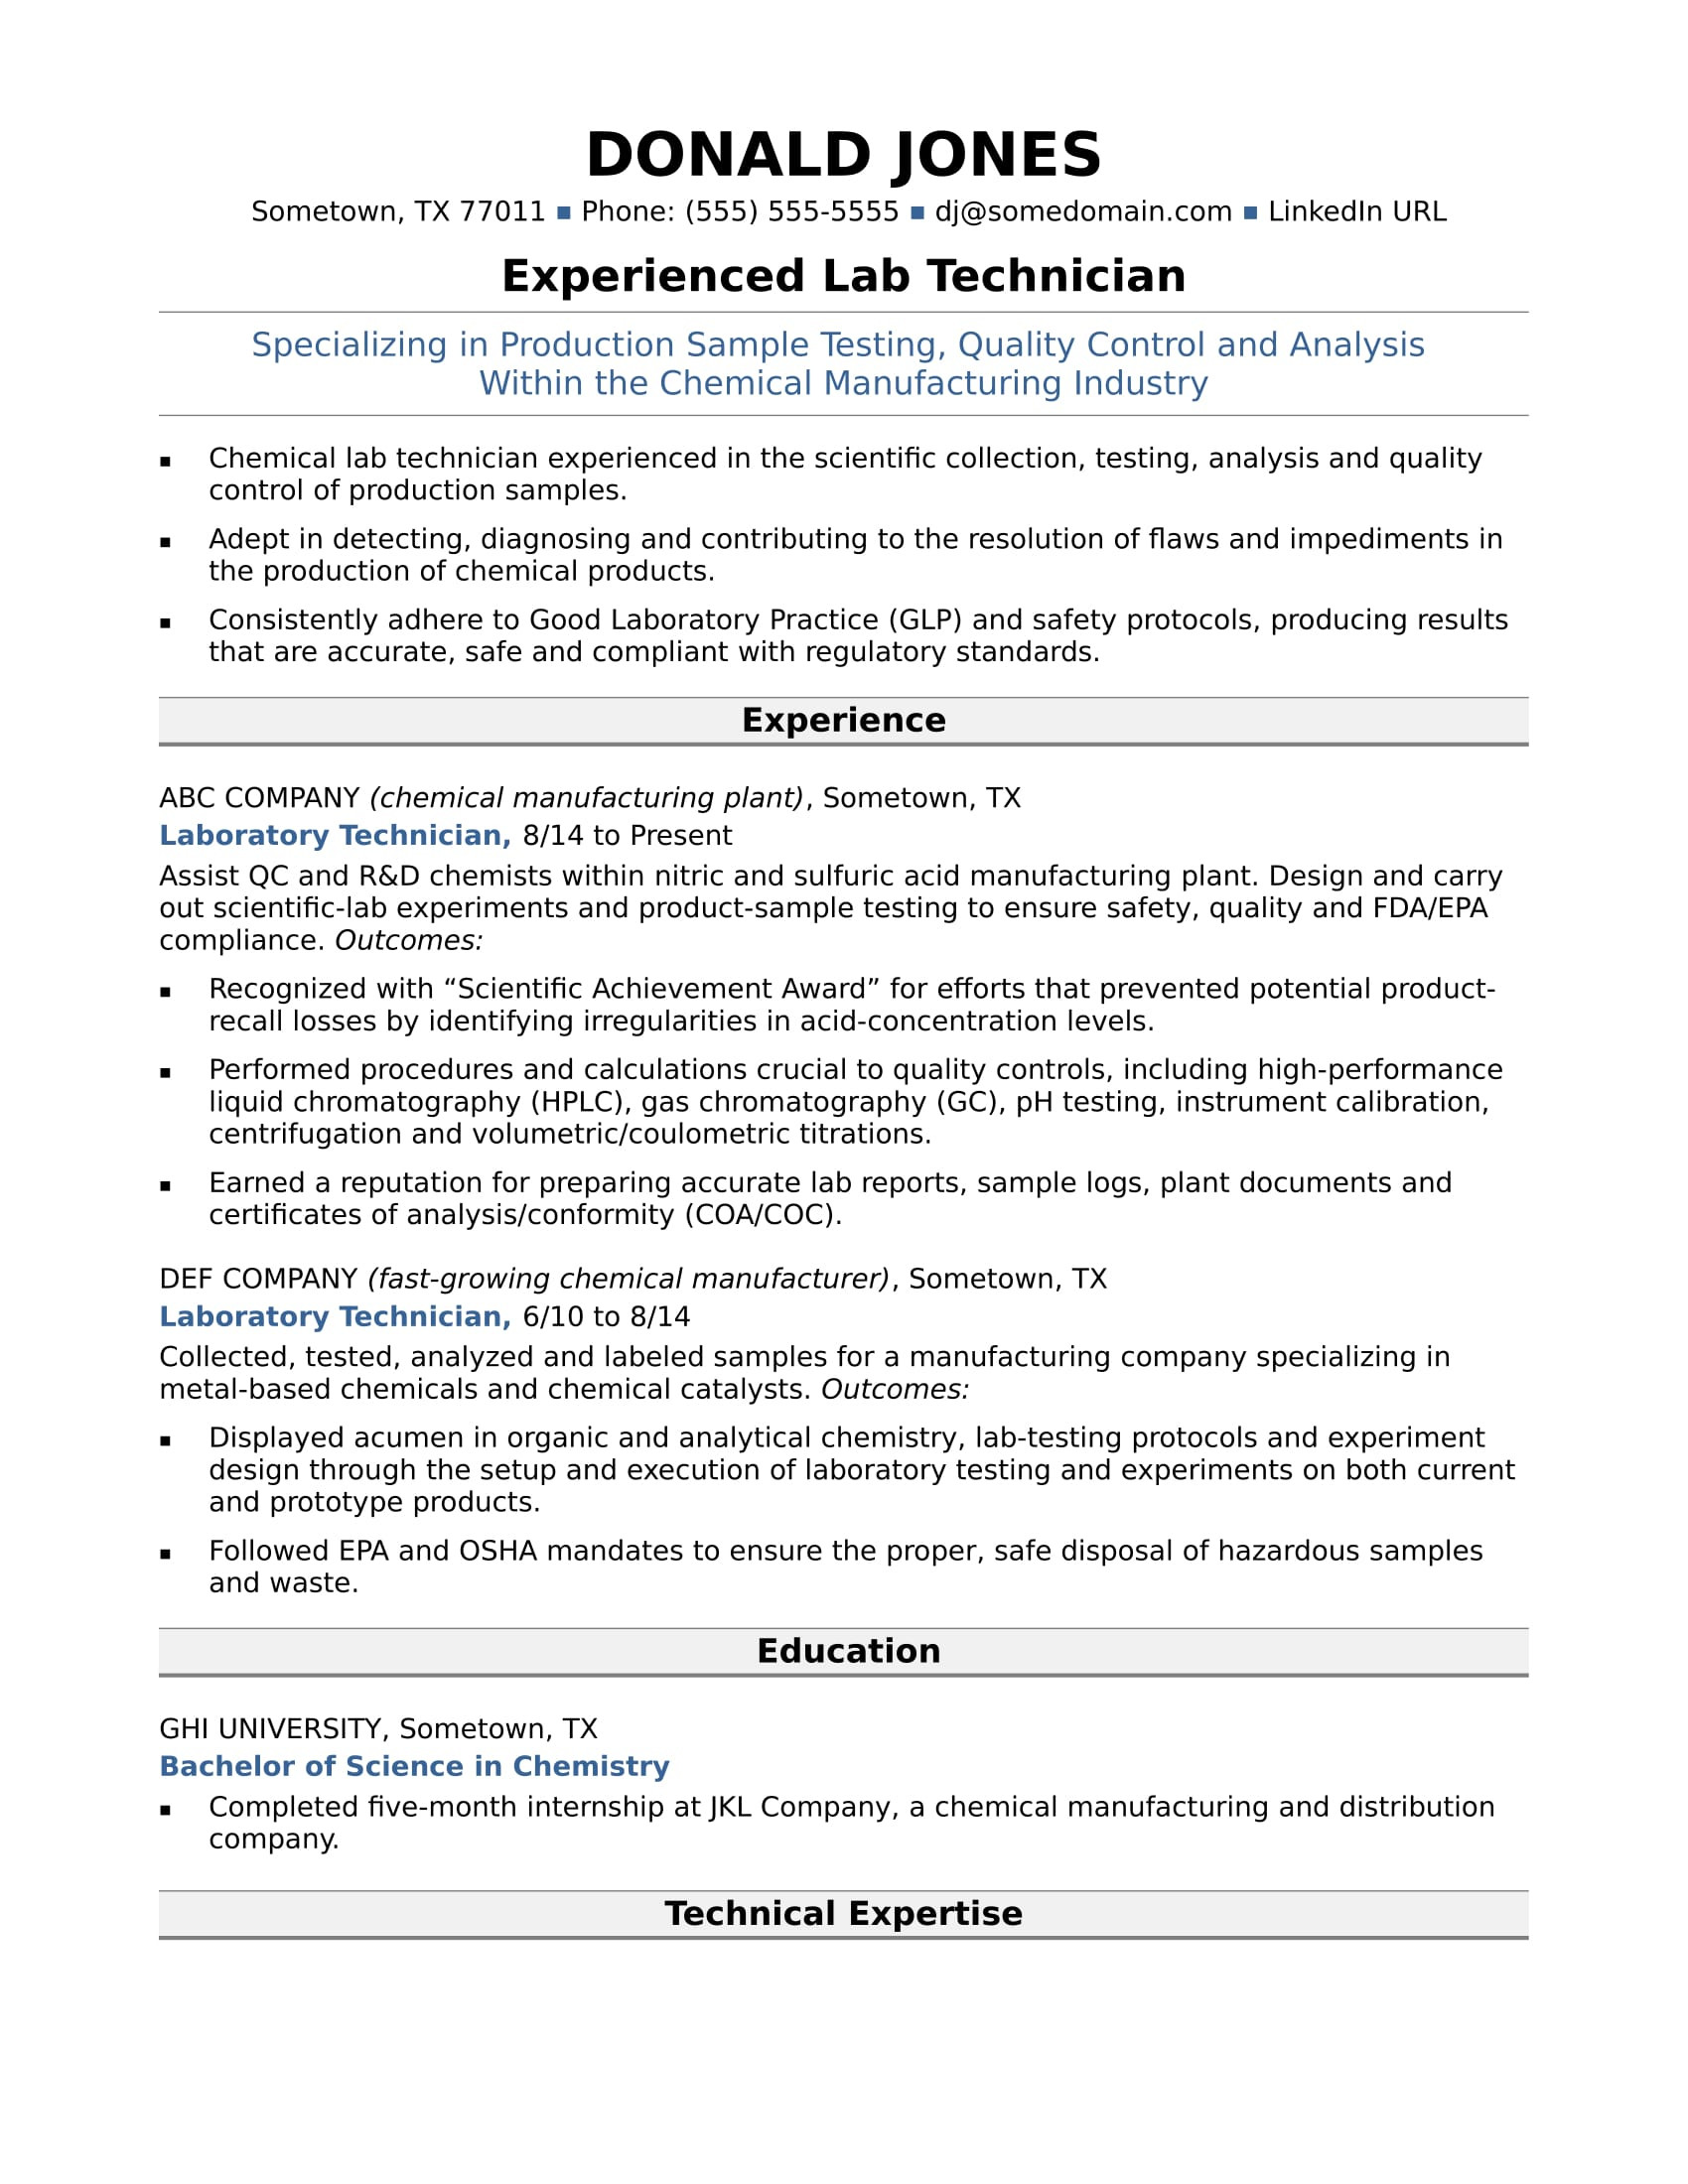 Sample Resume for Lab Technician Entry Level Midlevel Lab Technician Resume Sample Monster.com